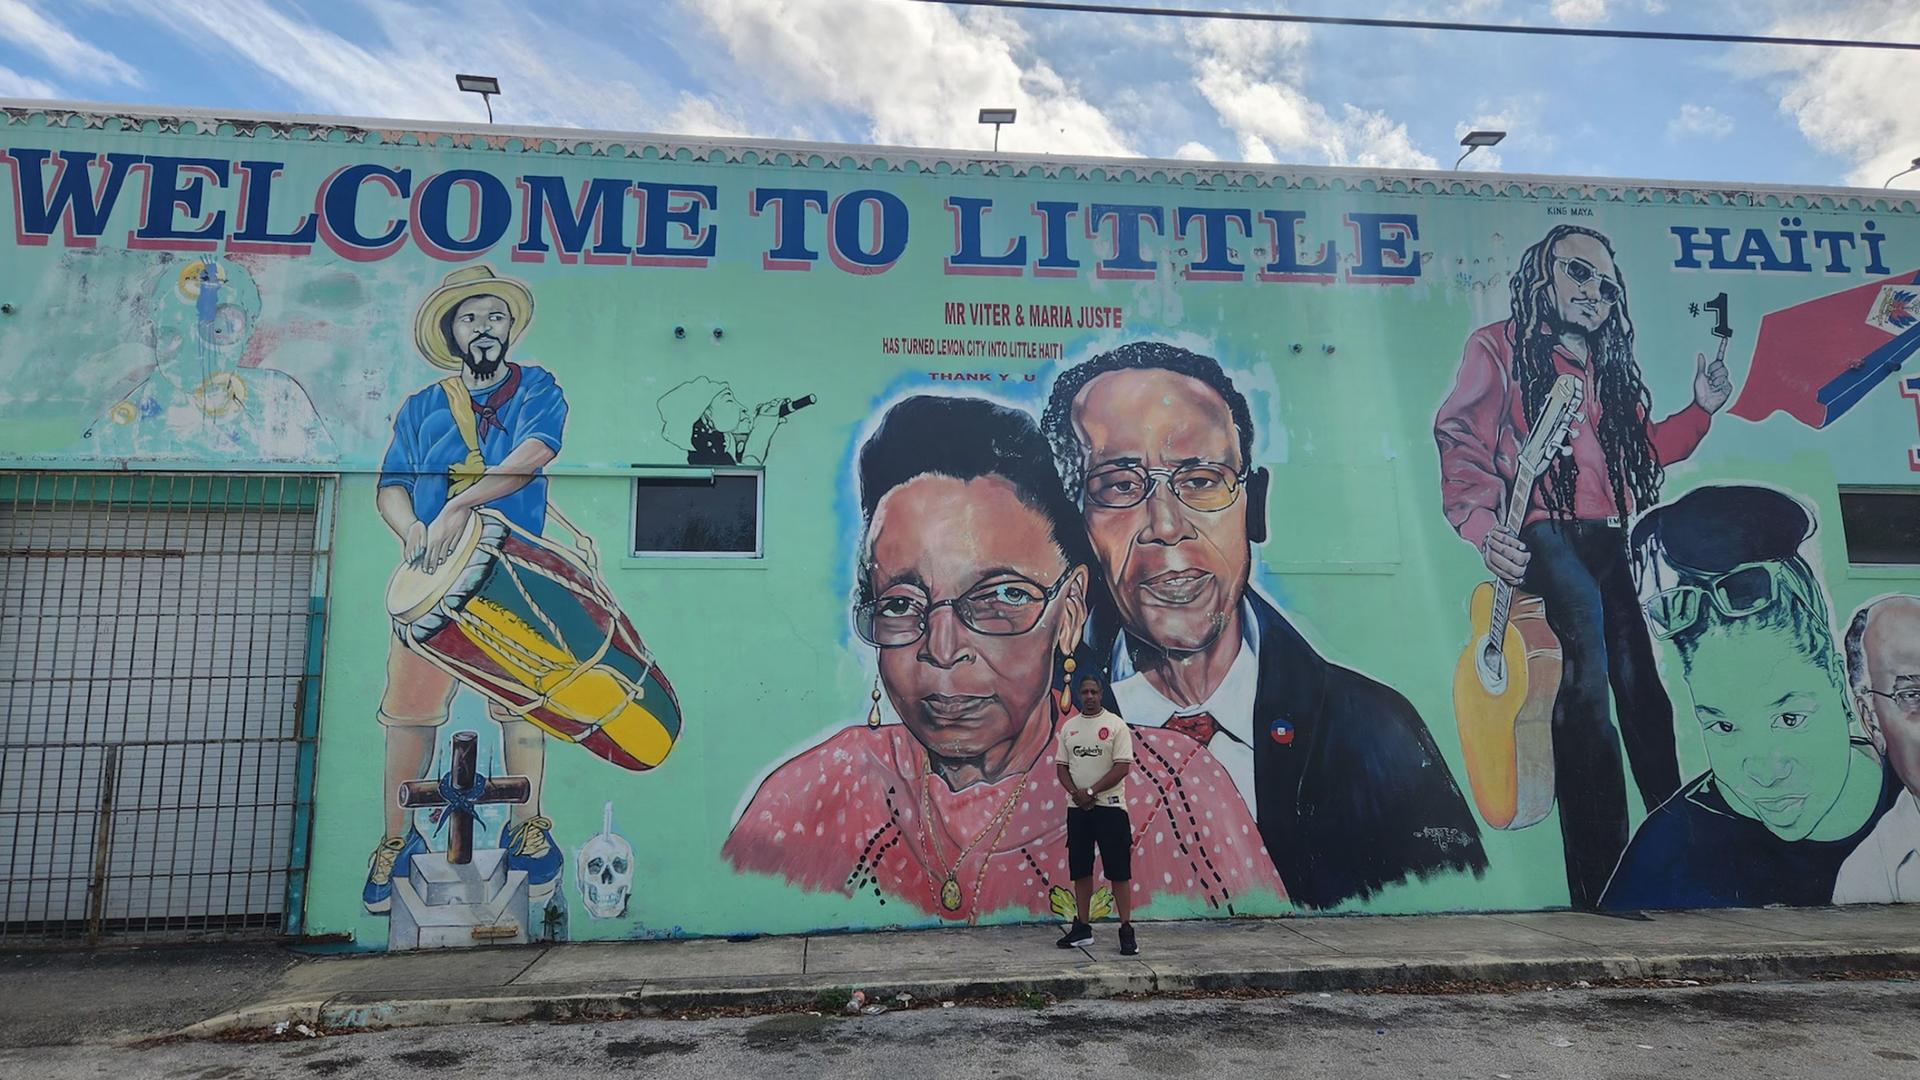 Winnick Blaine poses in front of the mural that features his grandparents, Maria and Viter Juste, who are considered to be the founders of Little Haiti in Miami.